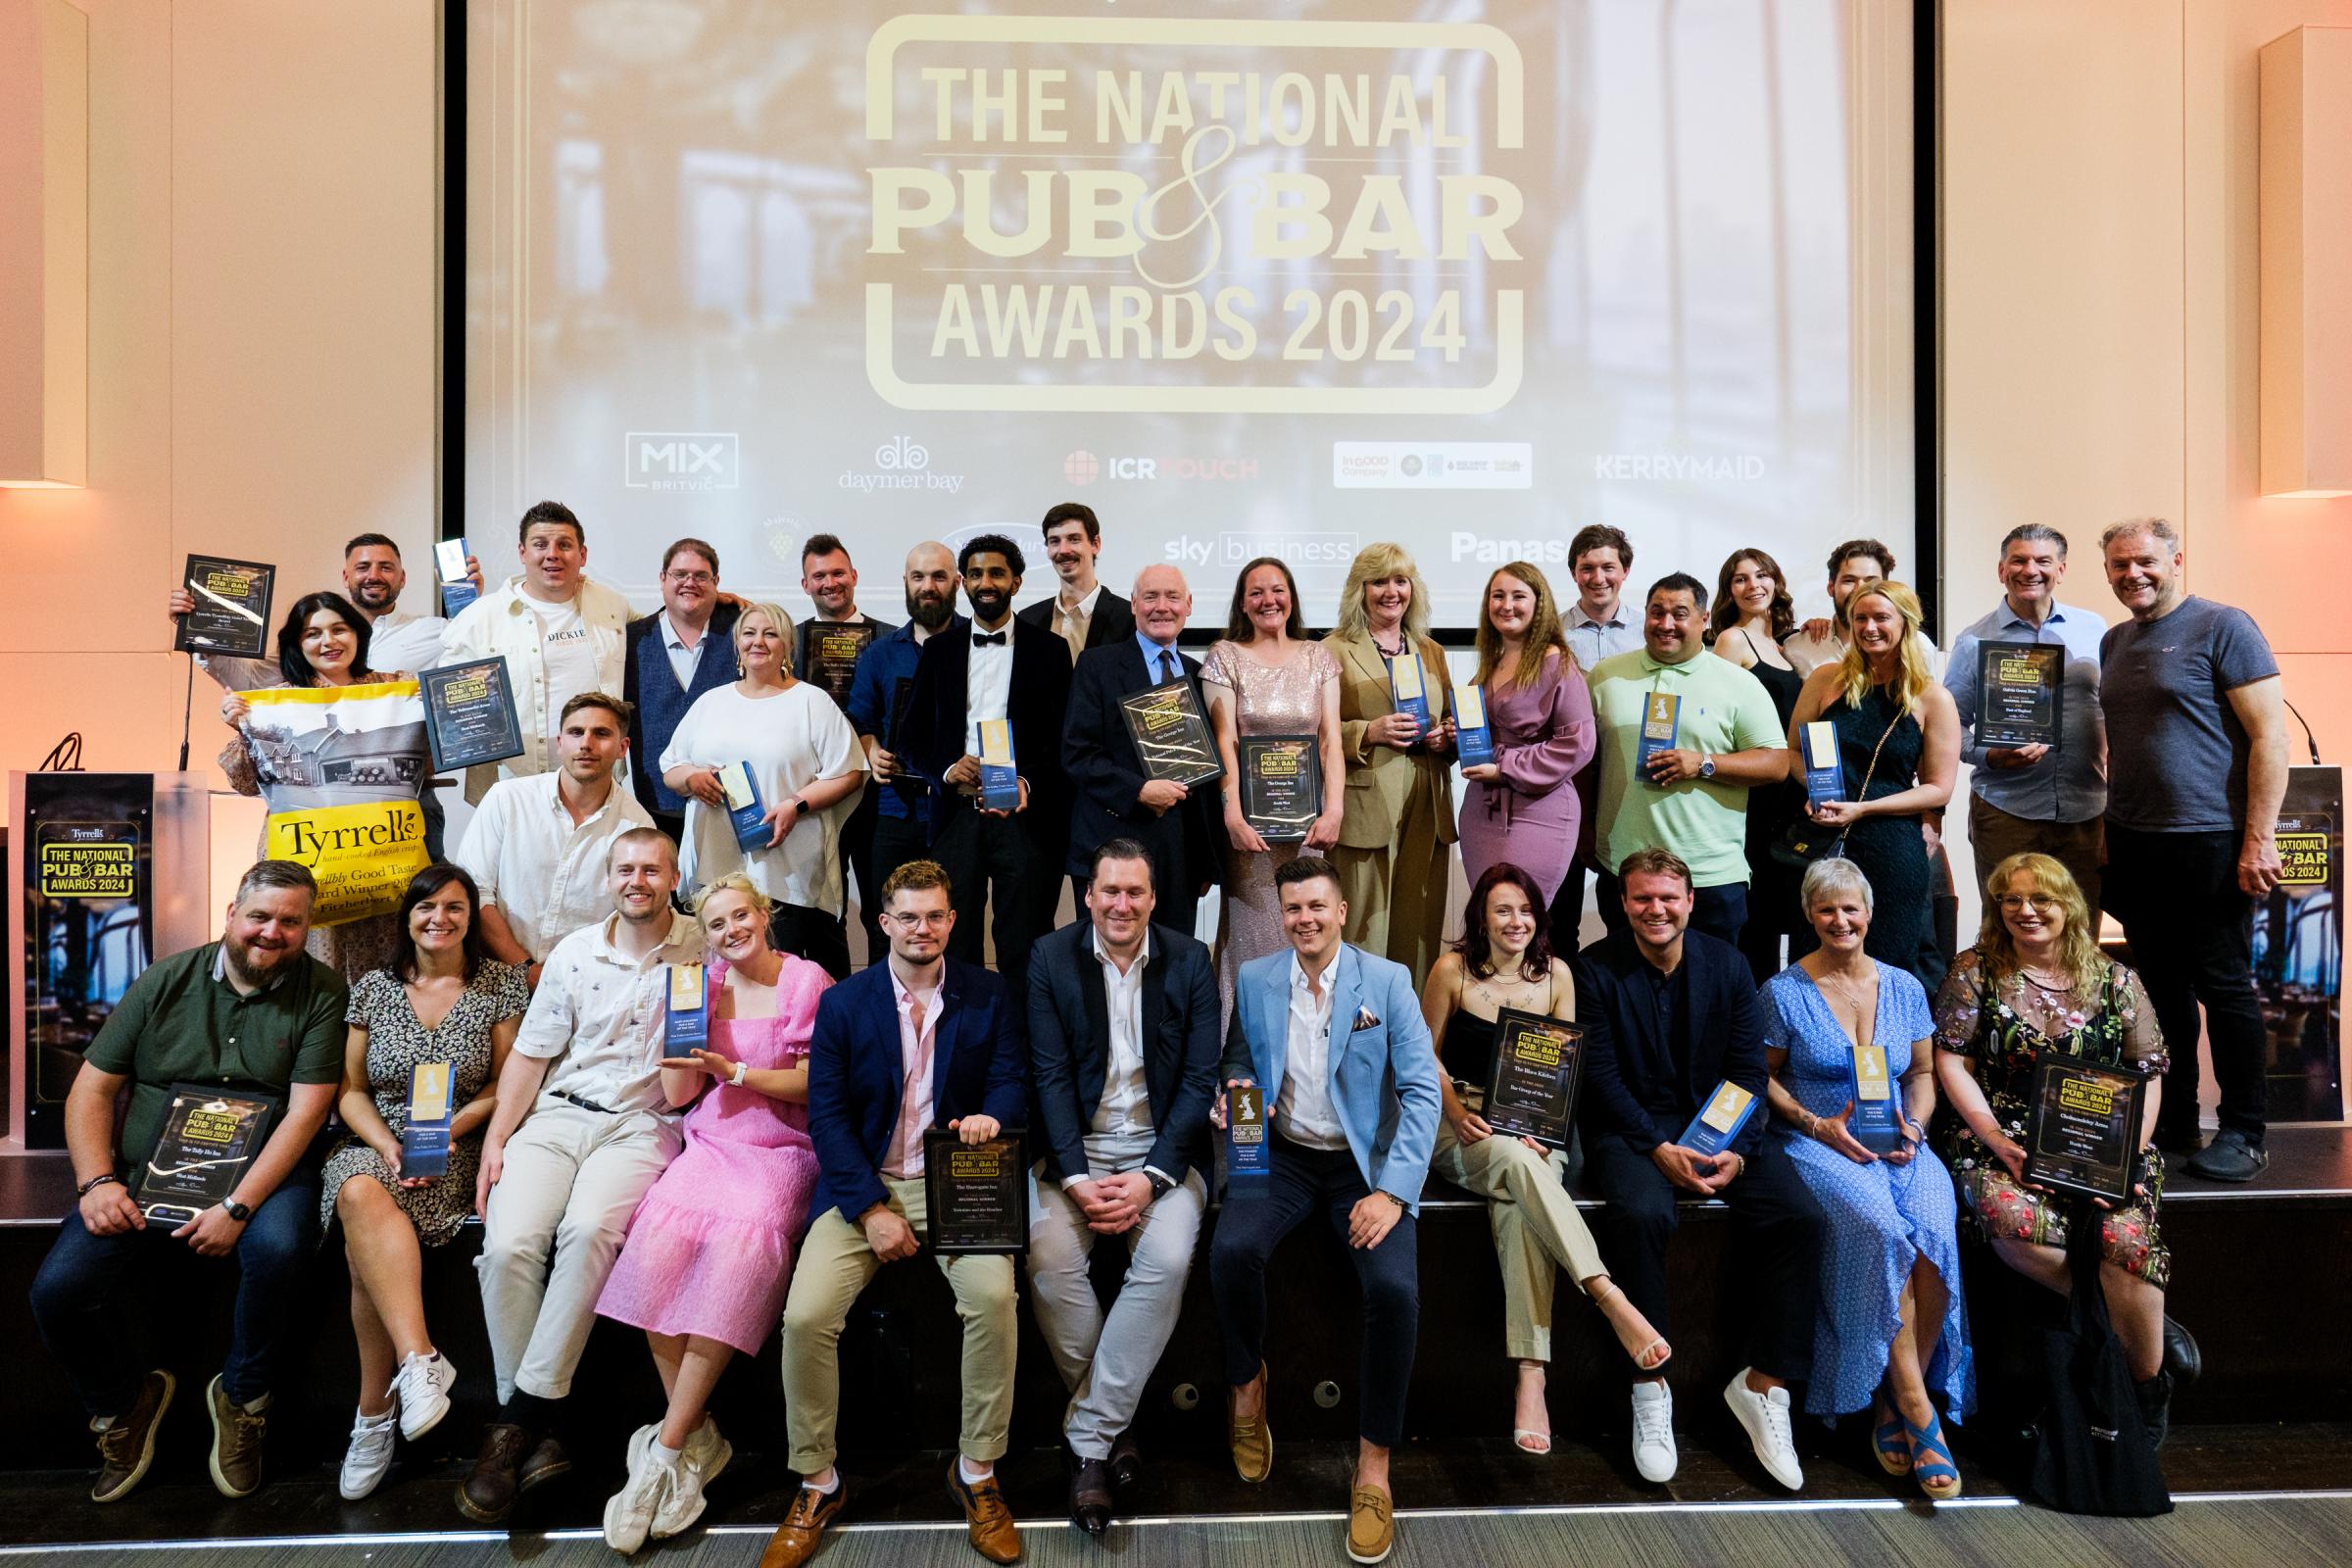 All the group winners at the National Pub & Bar Awards 2024.